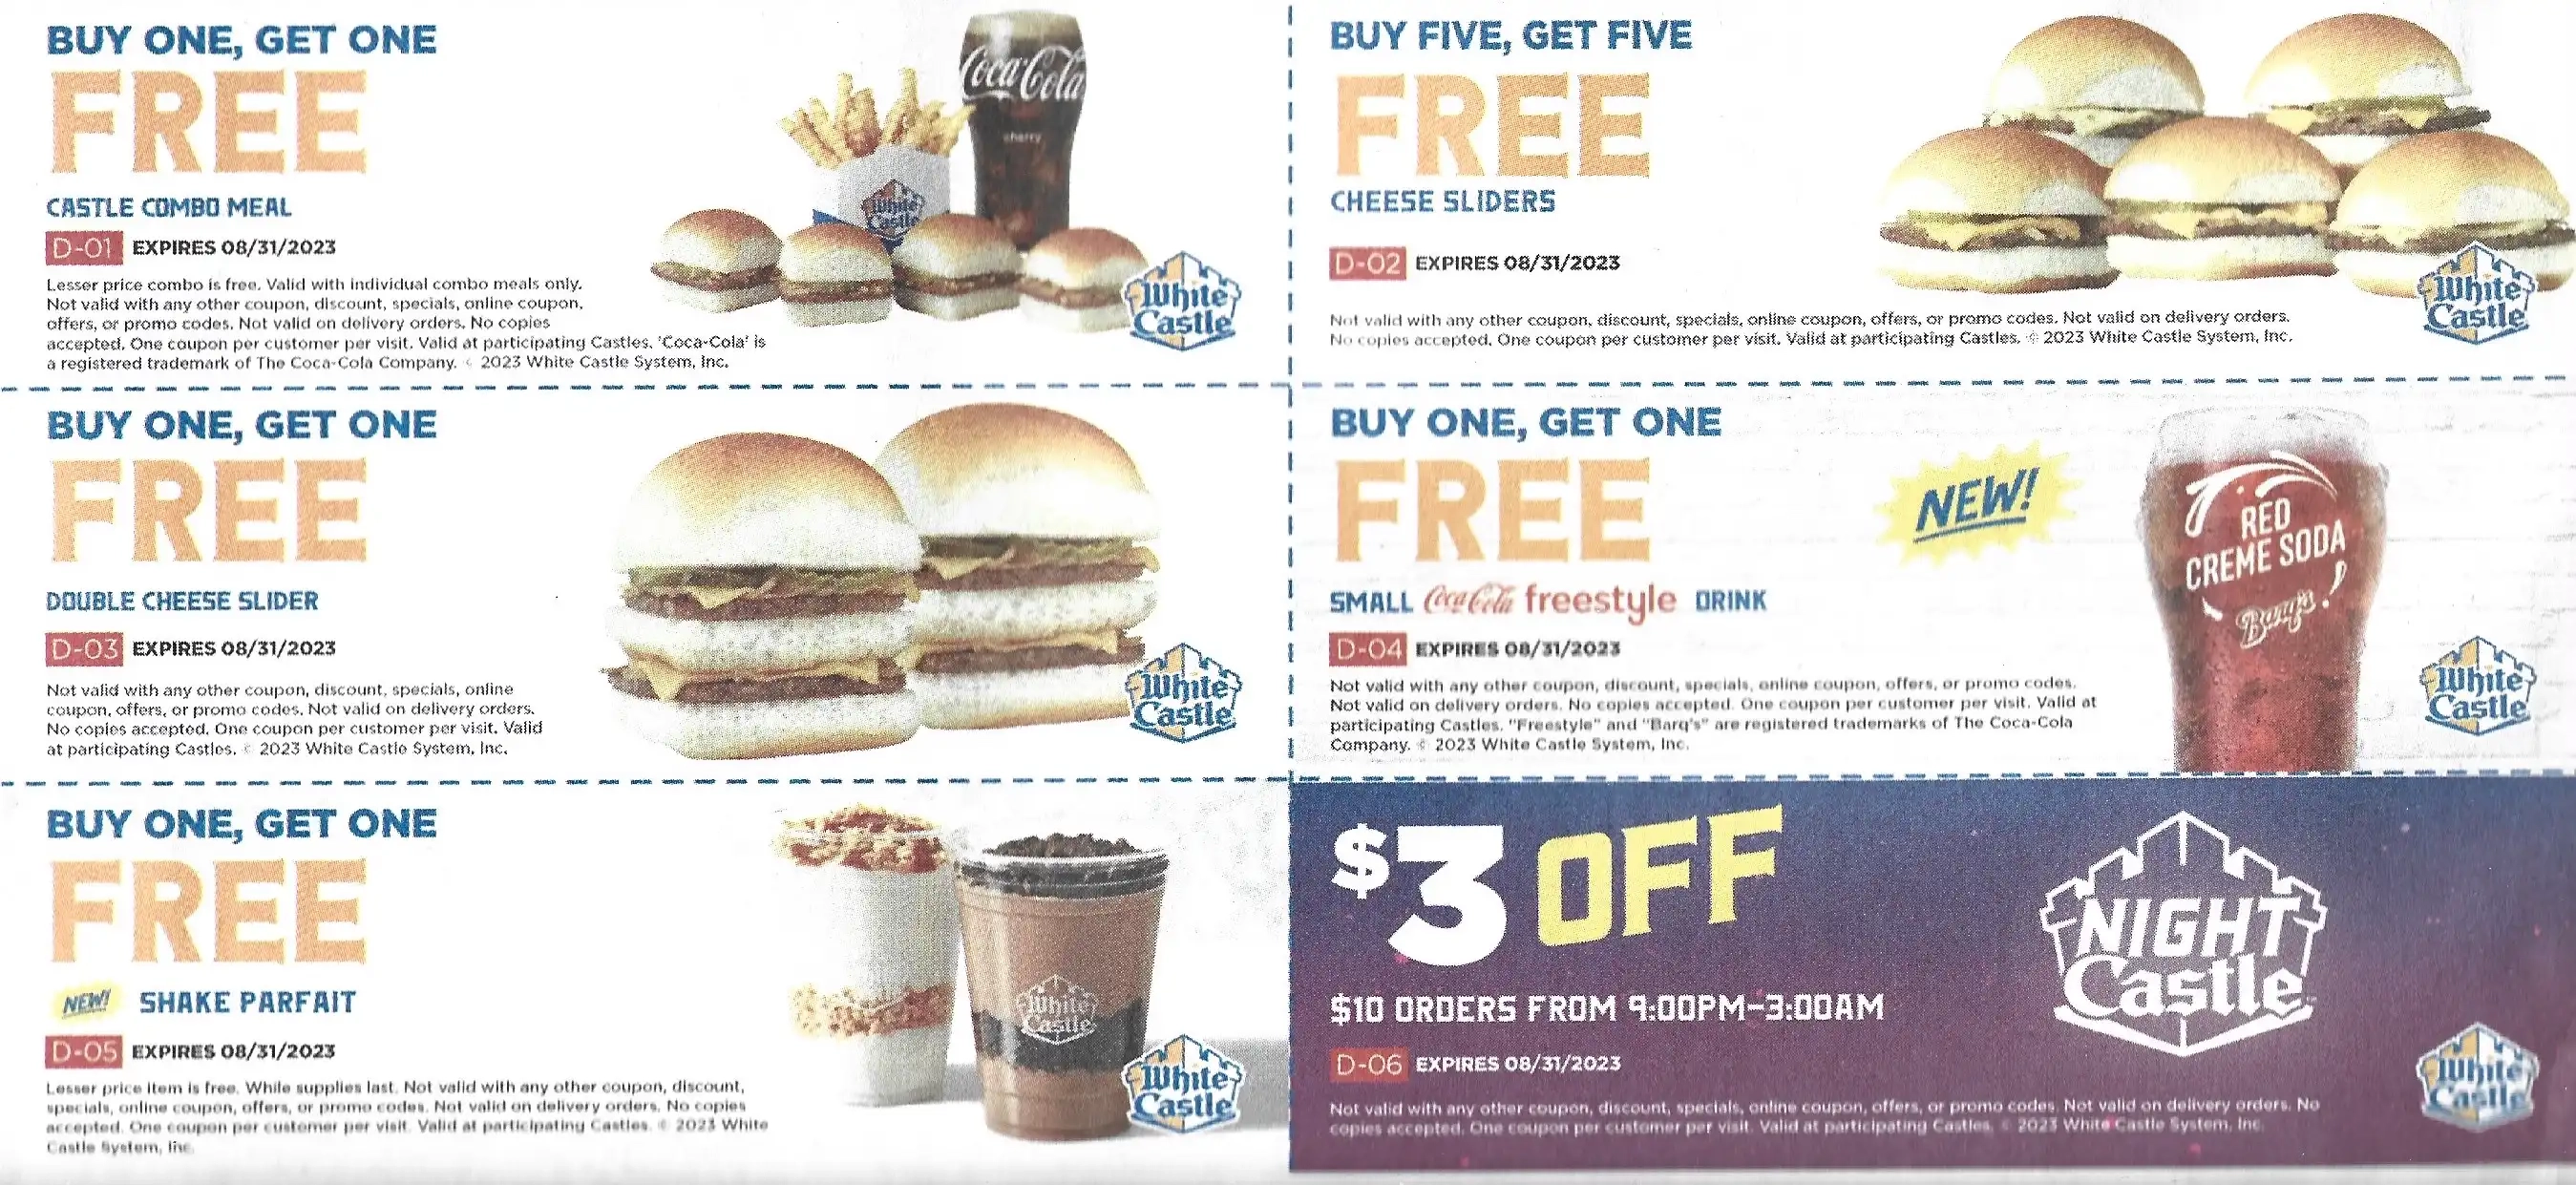 White Castle Coupons Buy One Get One Free Expires 08/31/2023